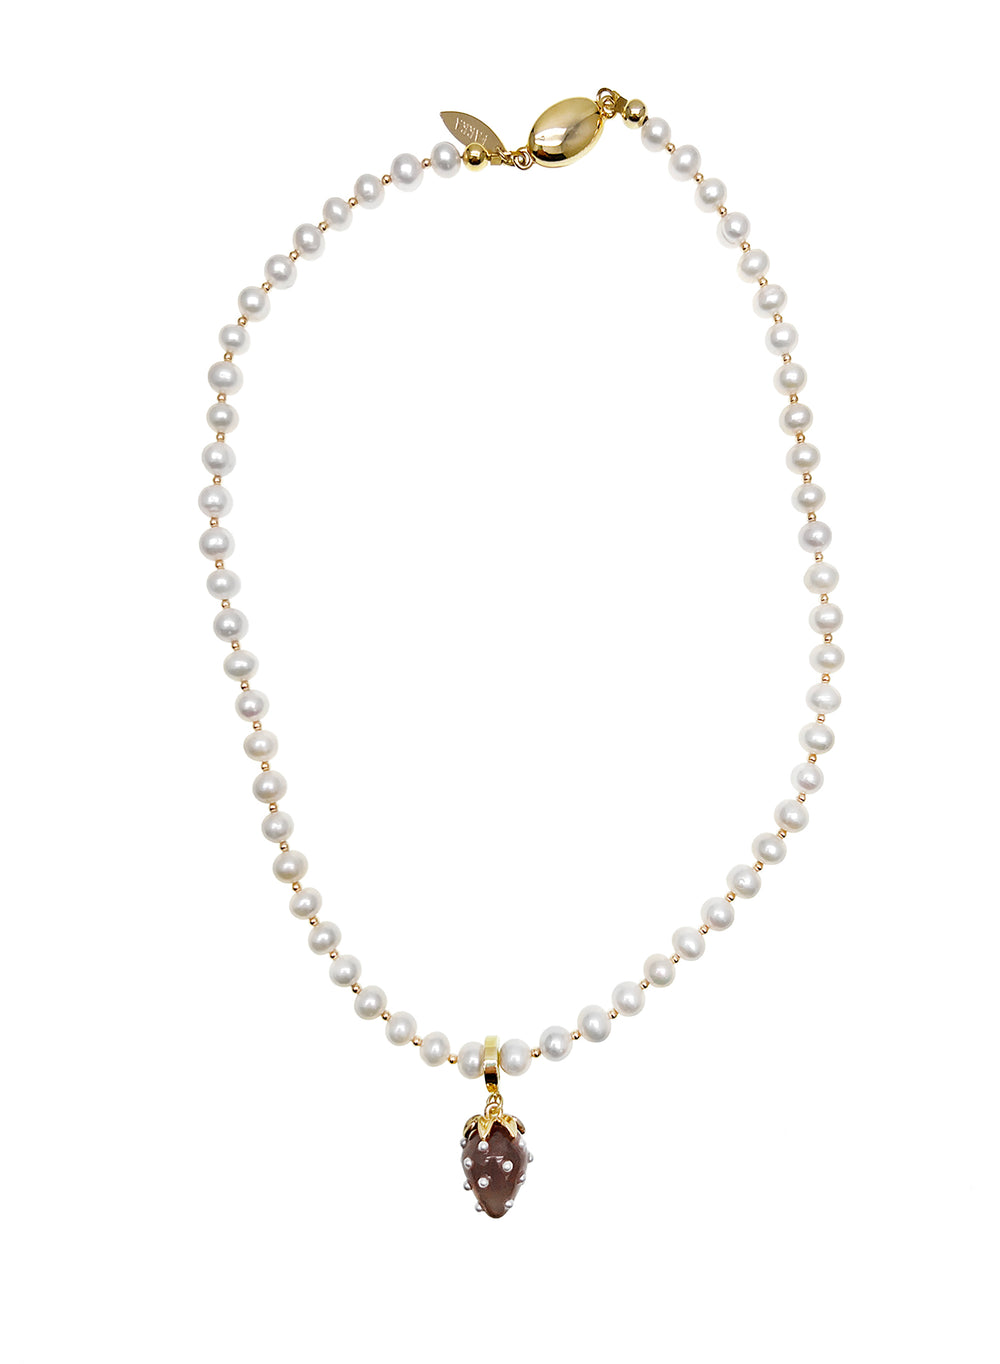 Freshwater Pearls with Removable Gray Strawberry Pendant Necklace JN062 - FARRA